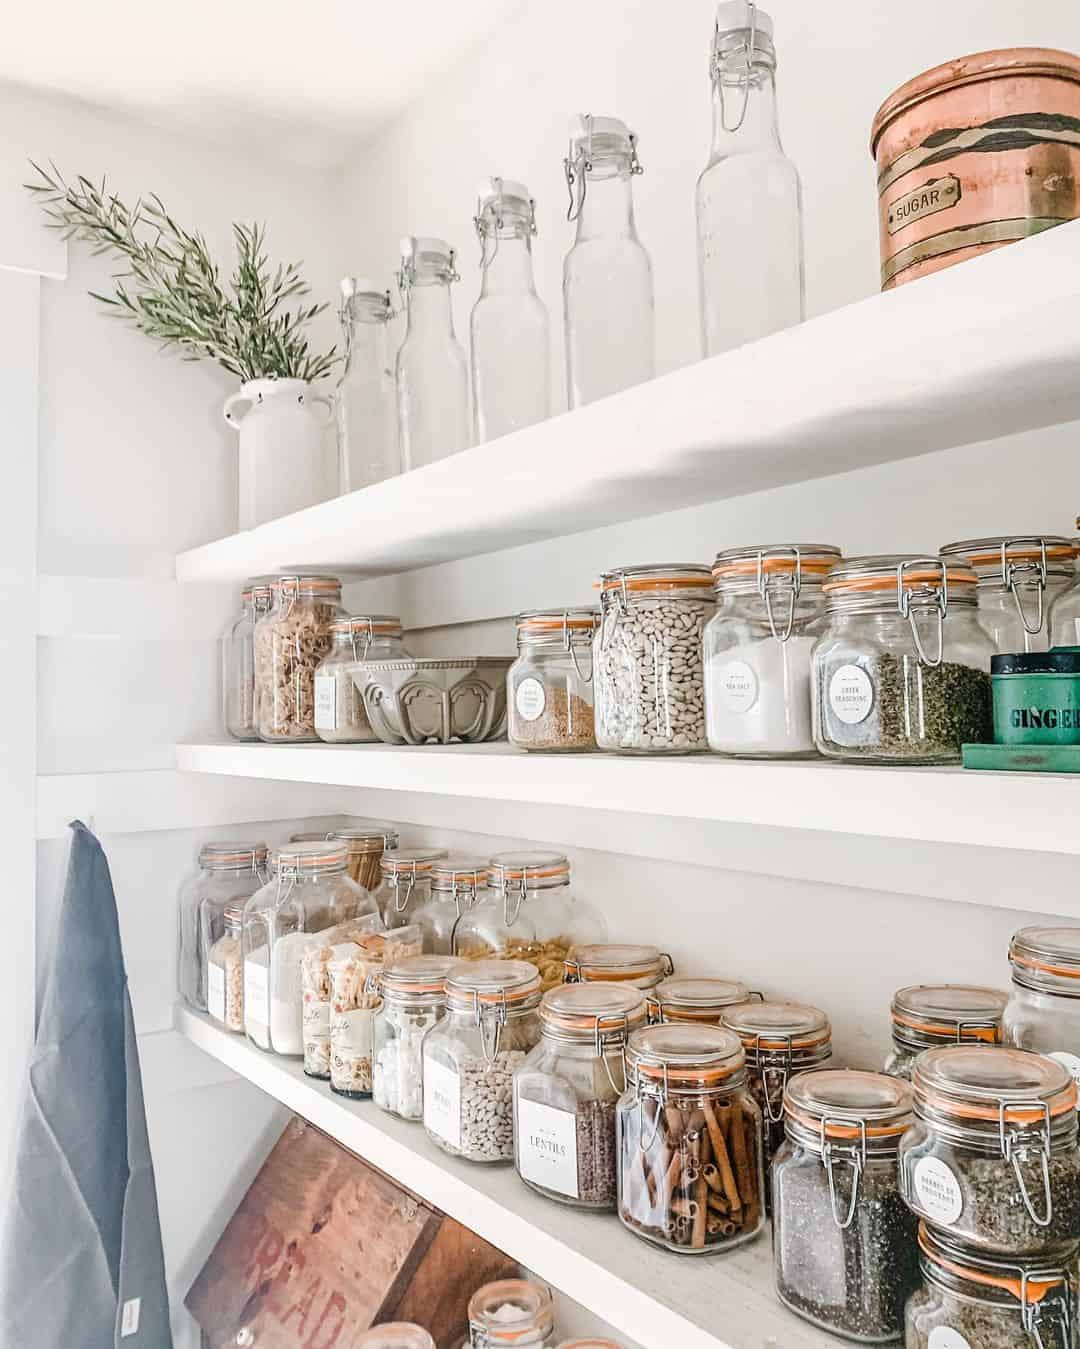 24 Floating Pantry Shelves to Define Your Space